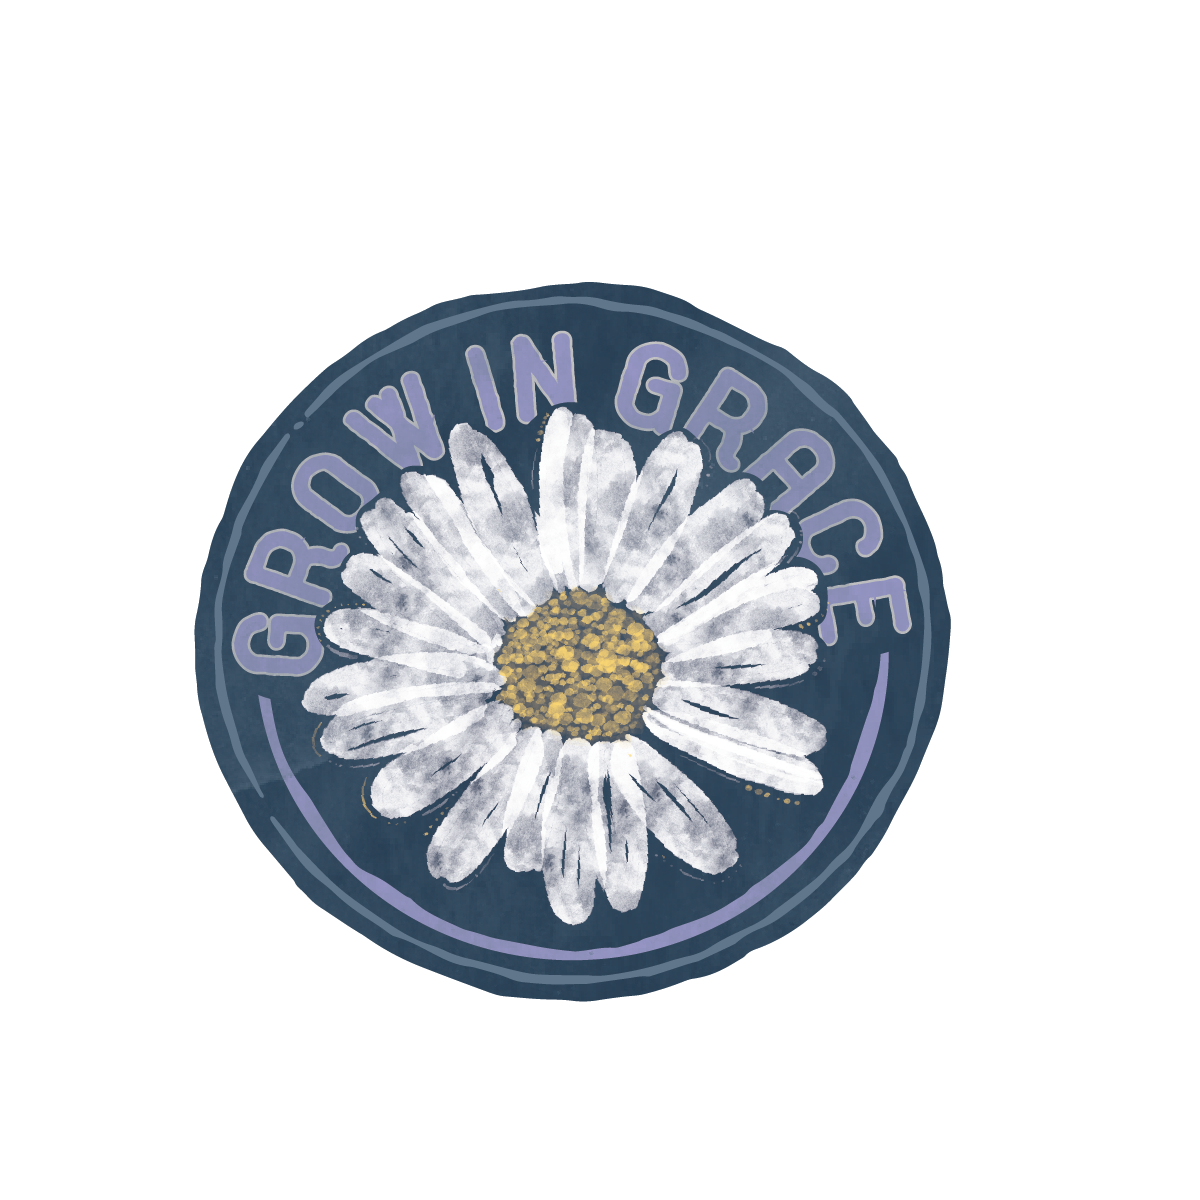 Grow in Grace - decal